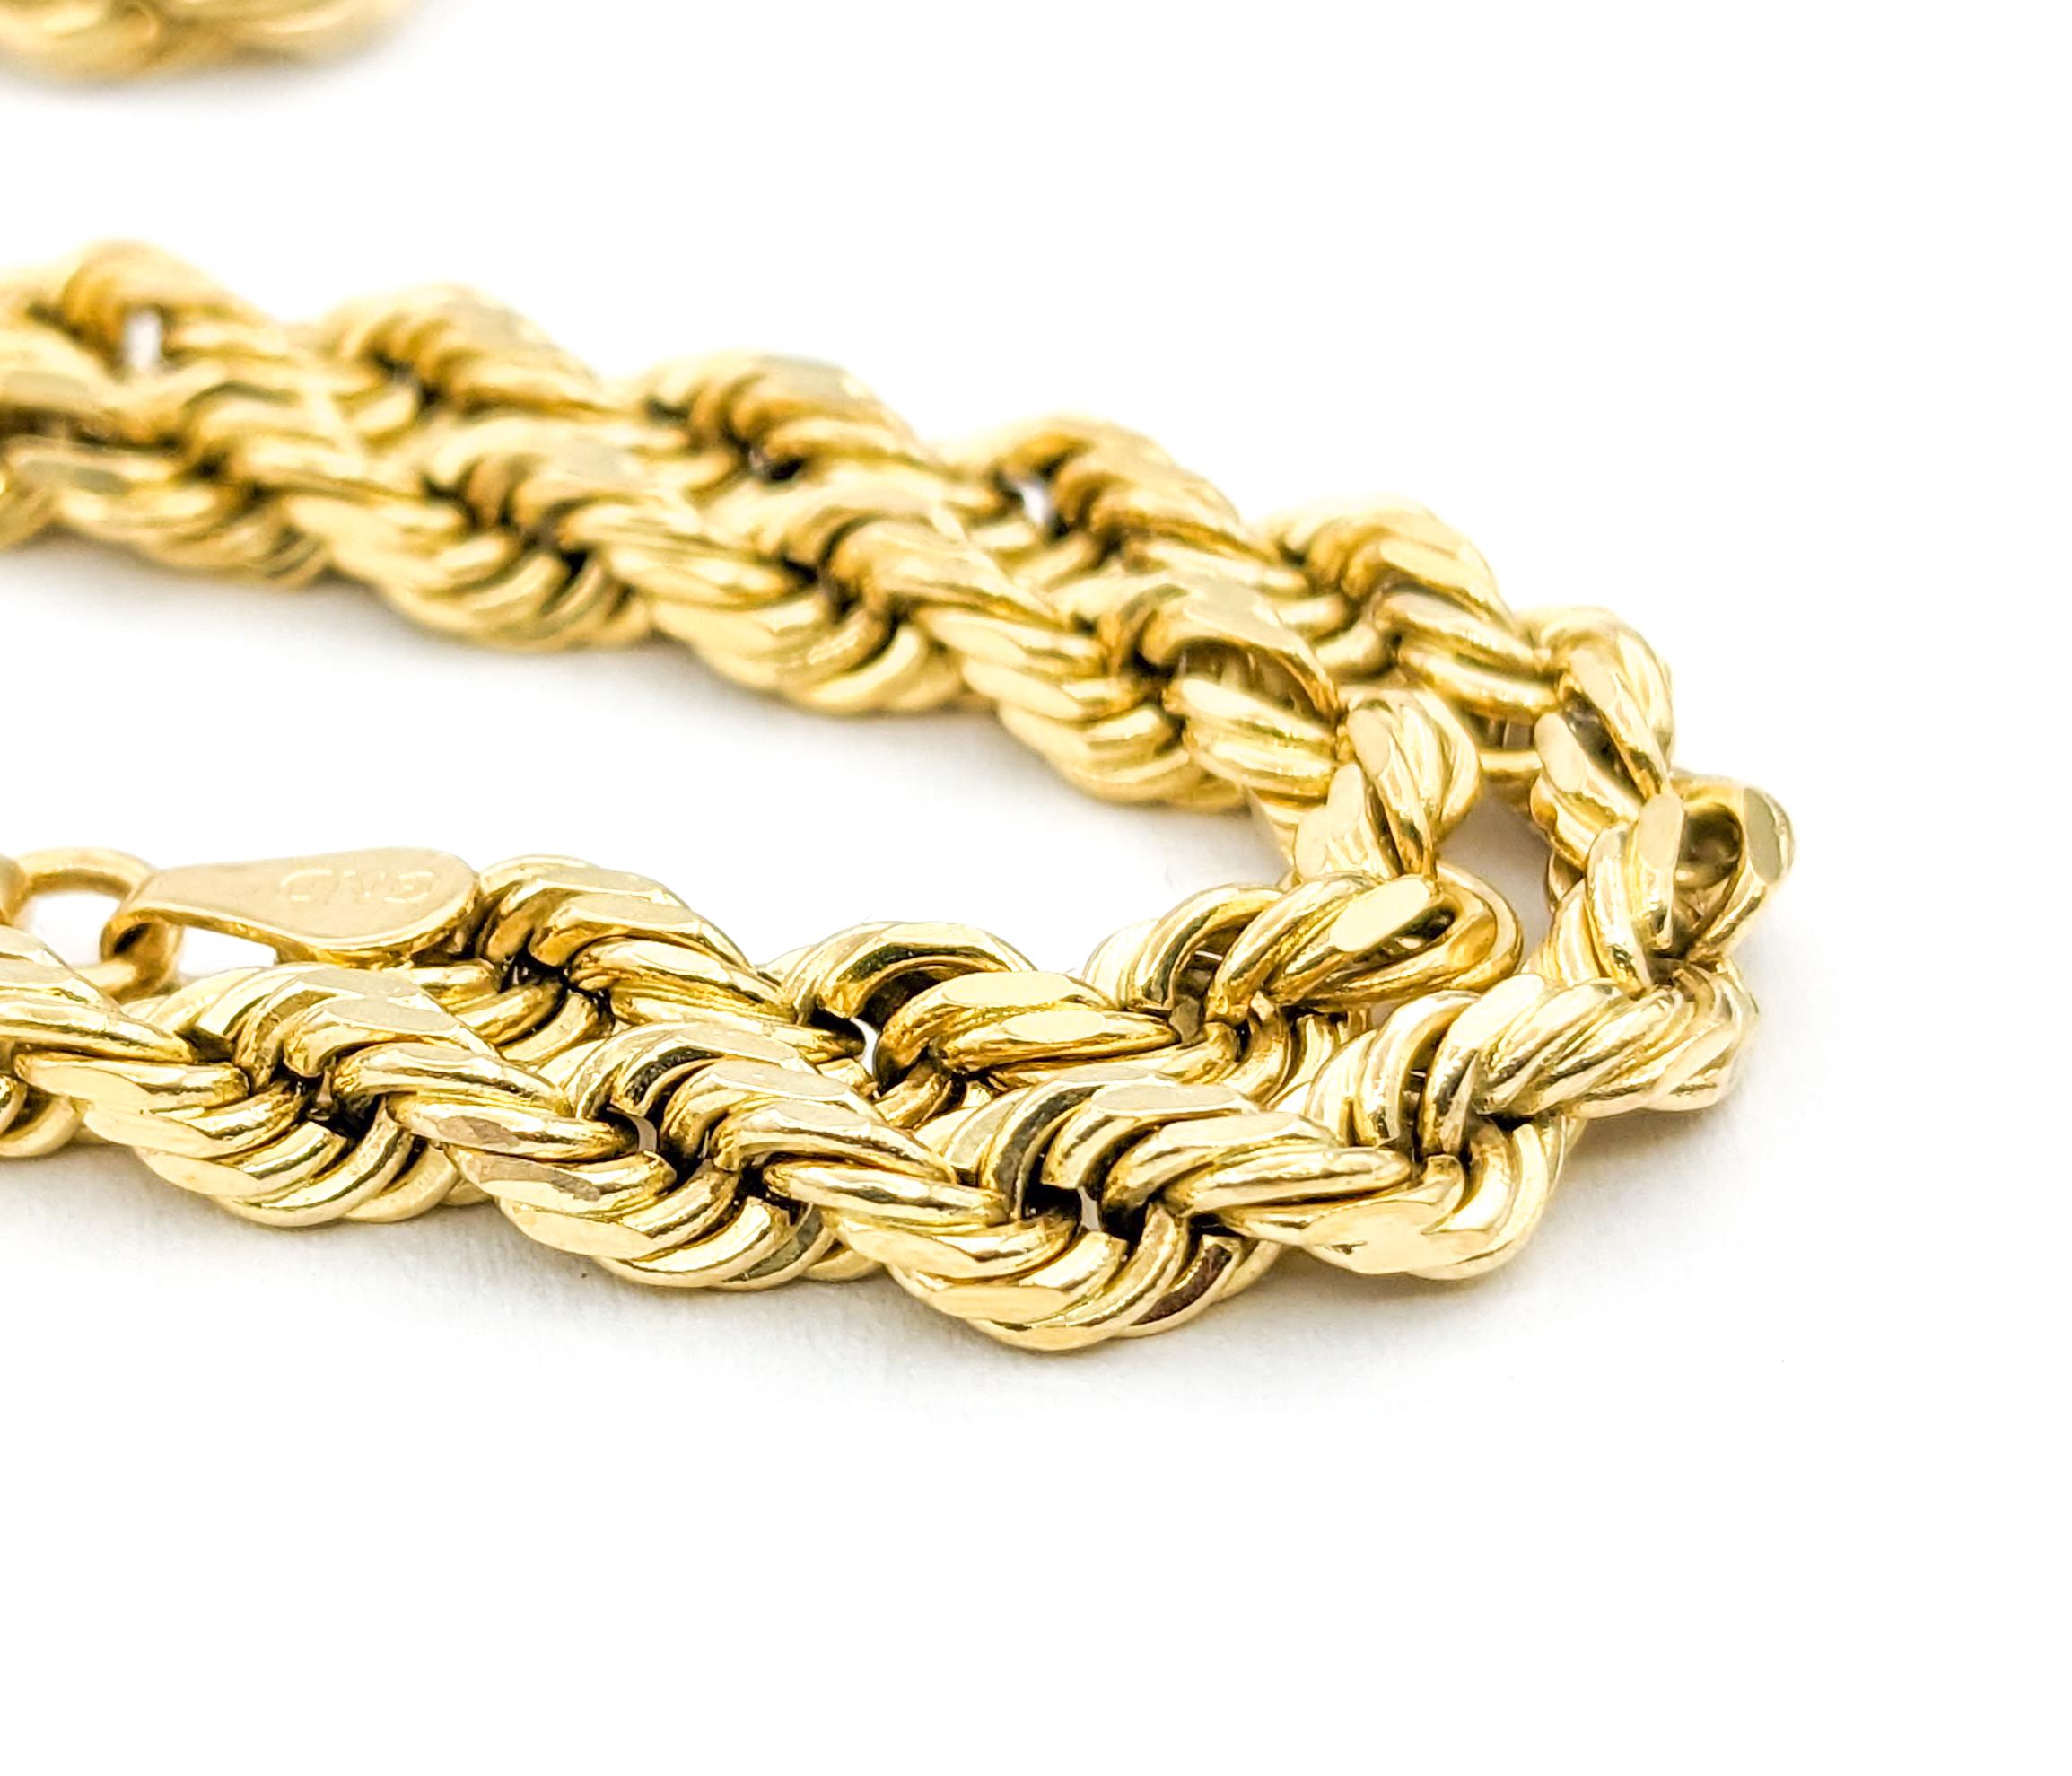 Classic Rope Design Necklace In Yellow Gold In Excellent Condition For Sale In Bloomington, MN